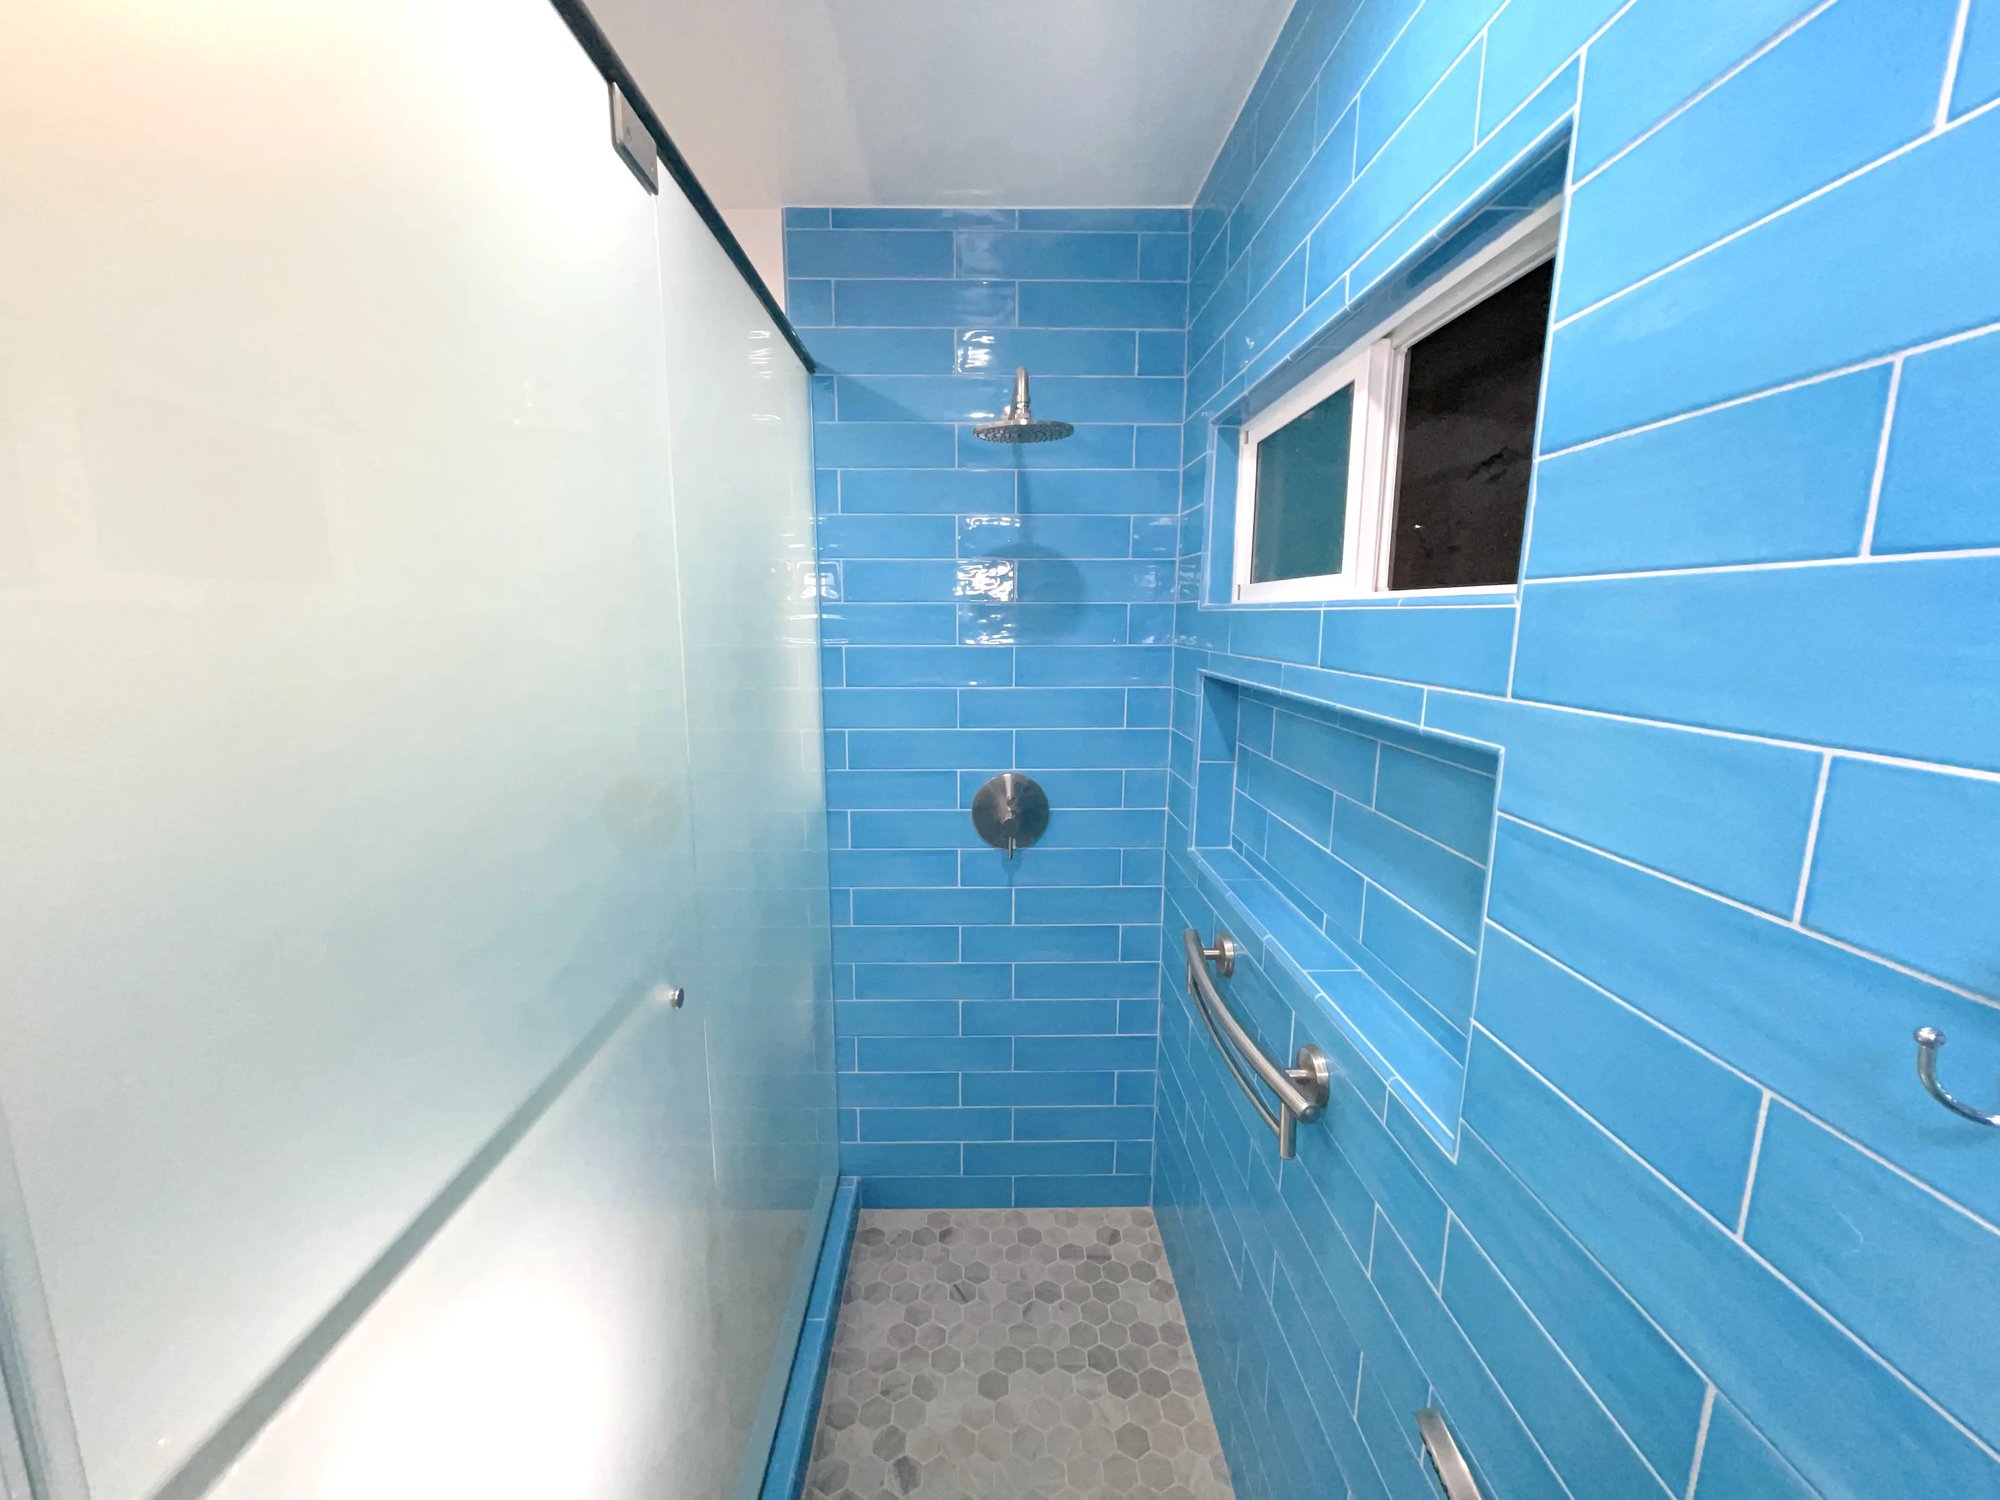 A look at the frosted glass paneling from inside the walk in shower.